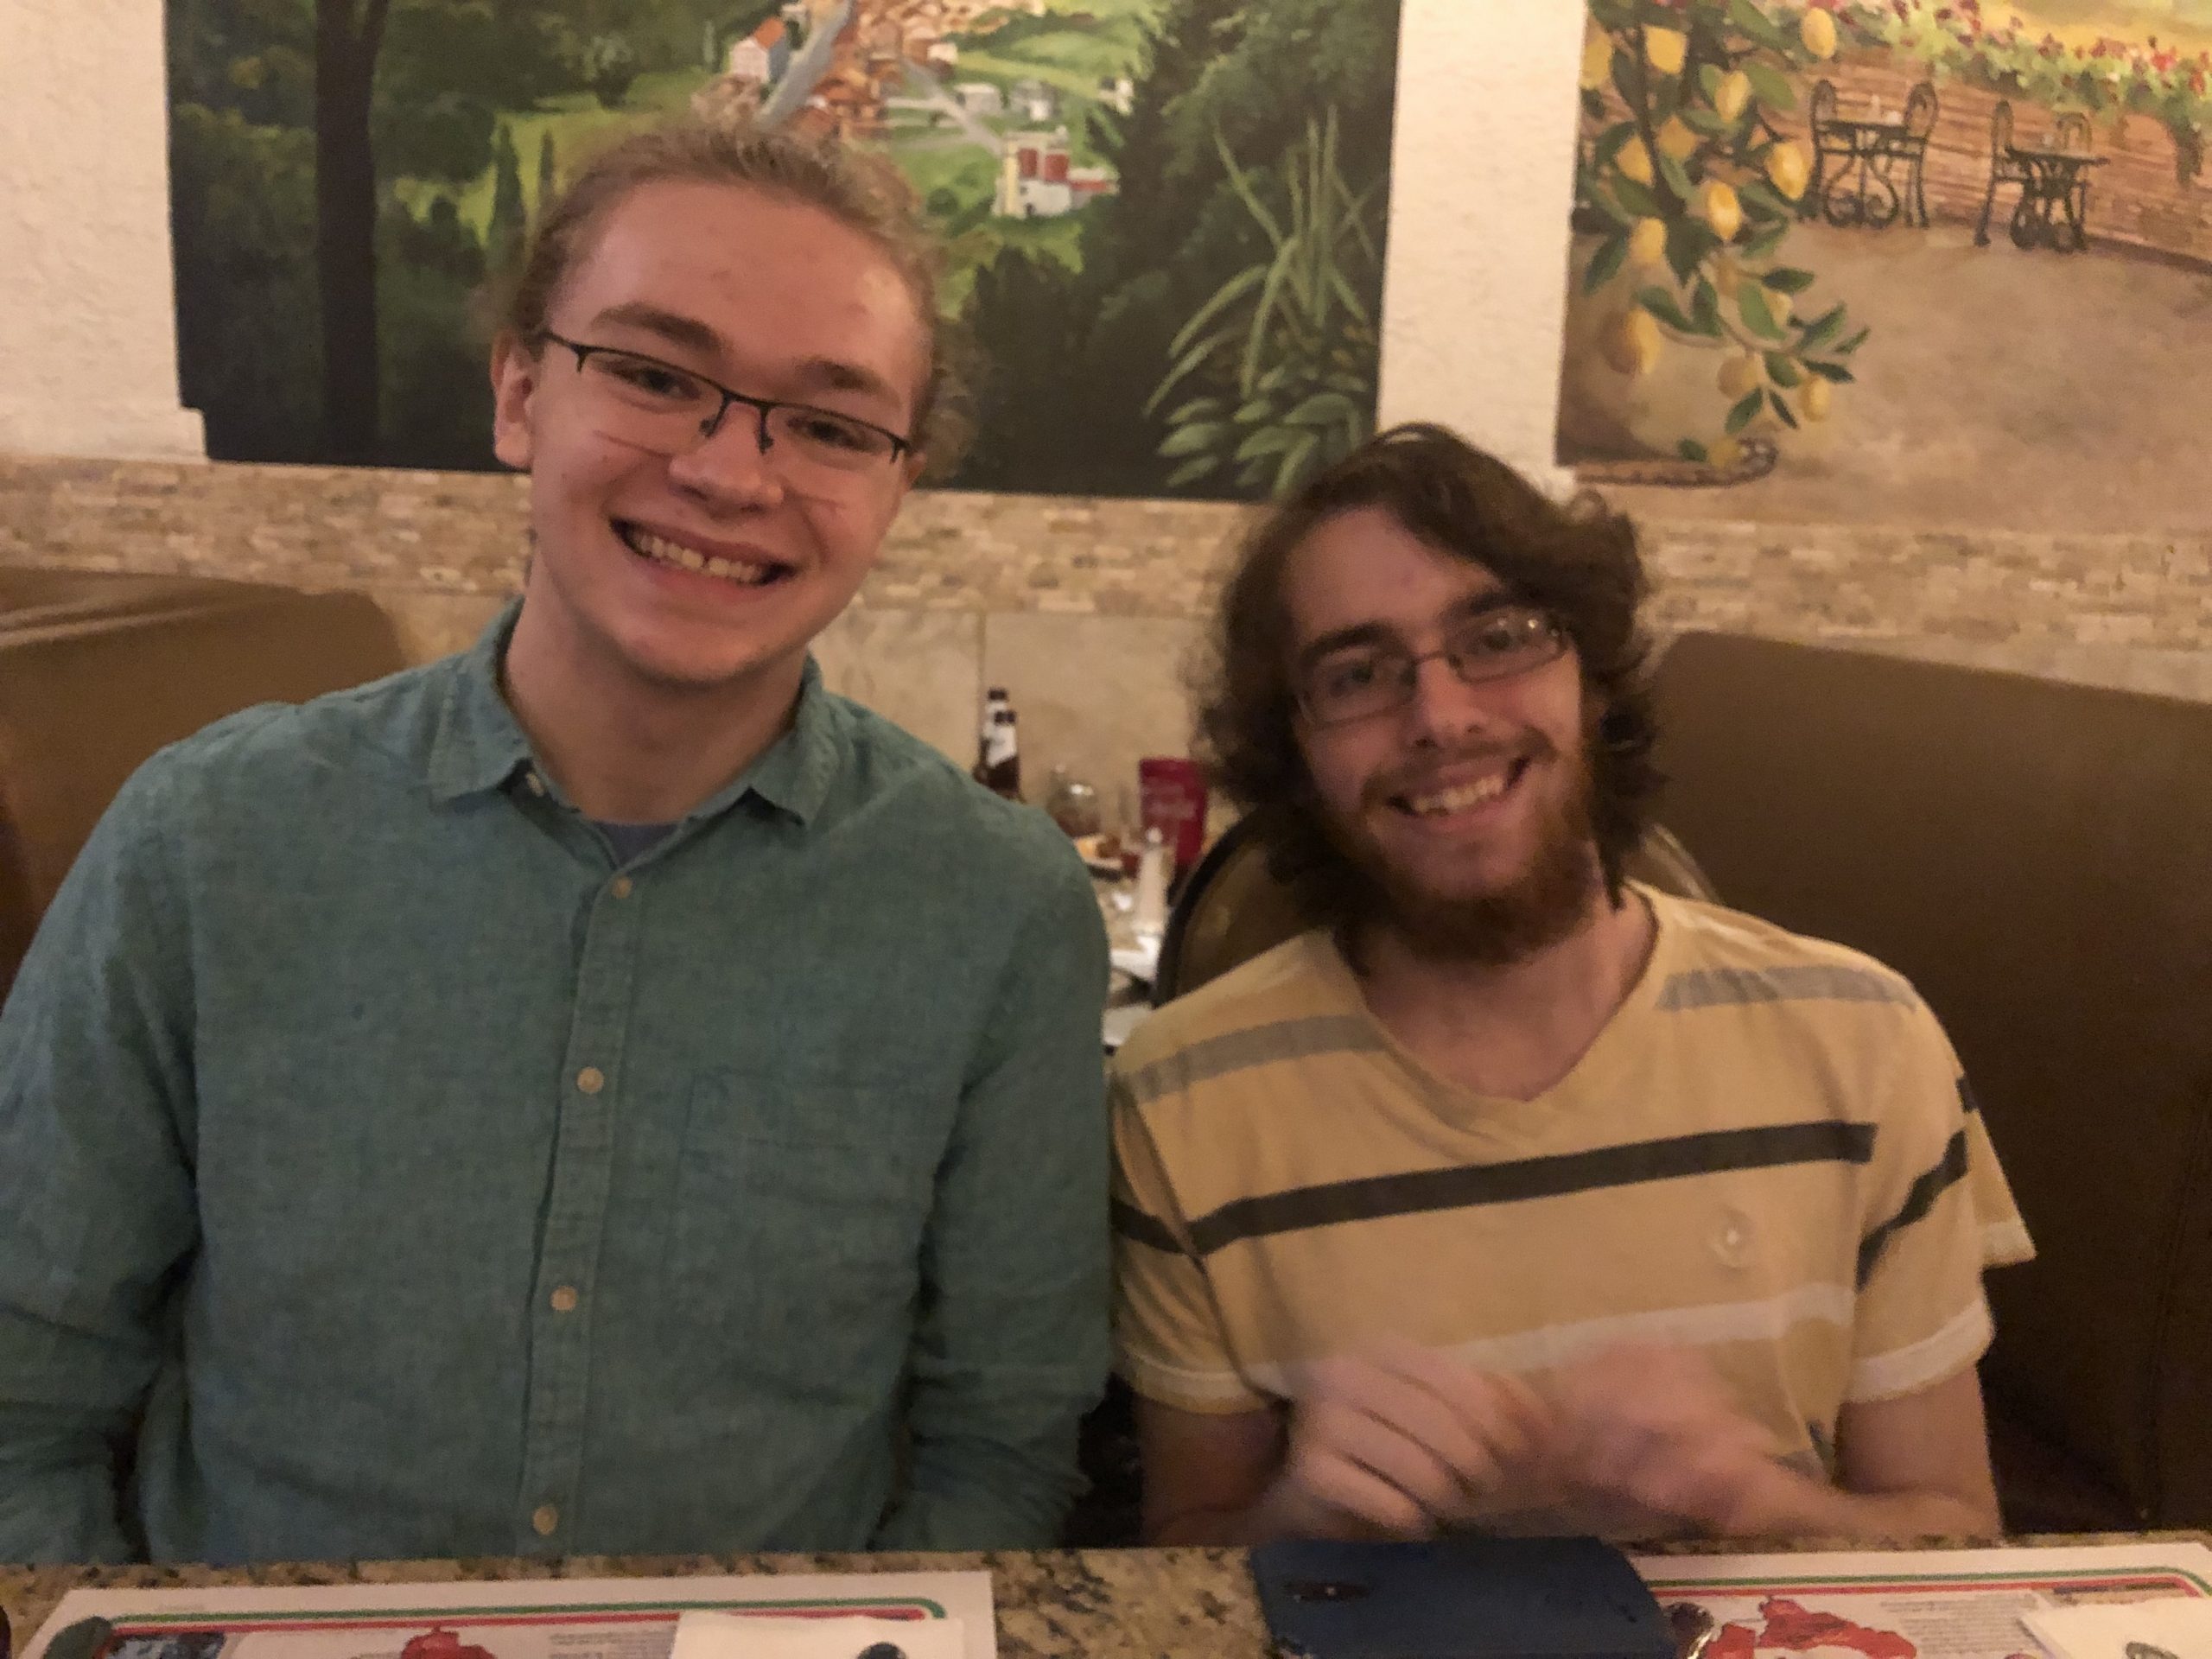 Two people sitting at a table smiling